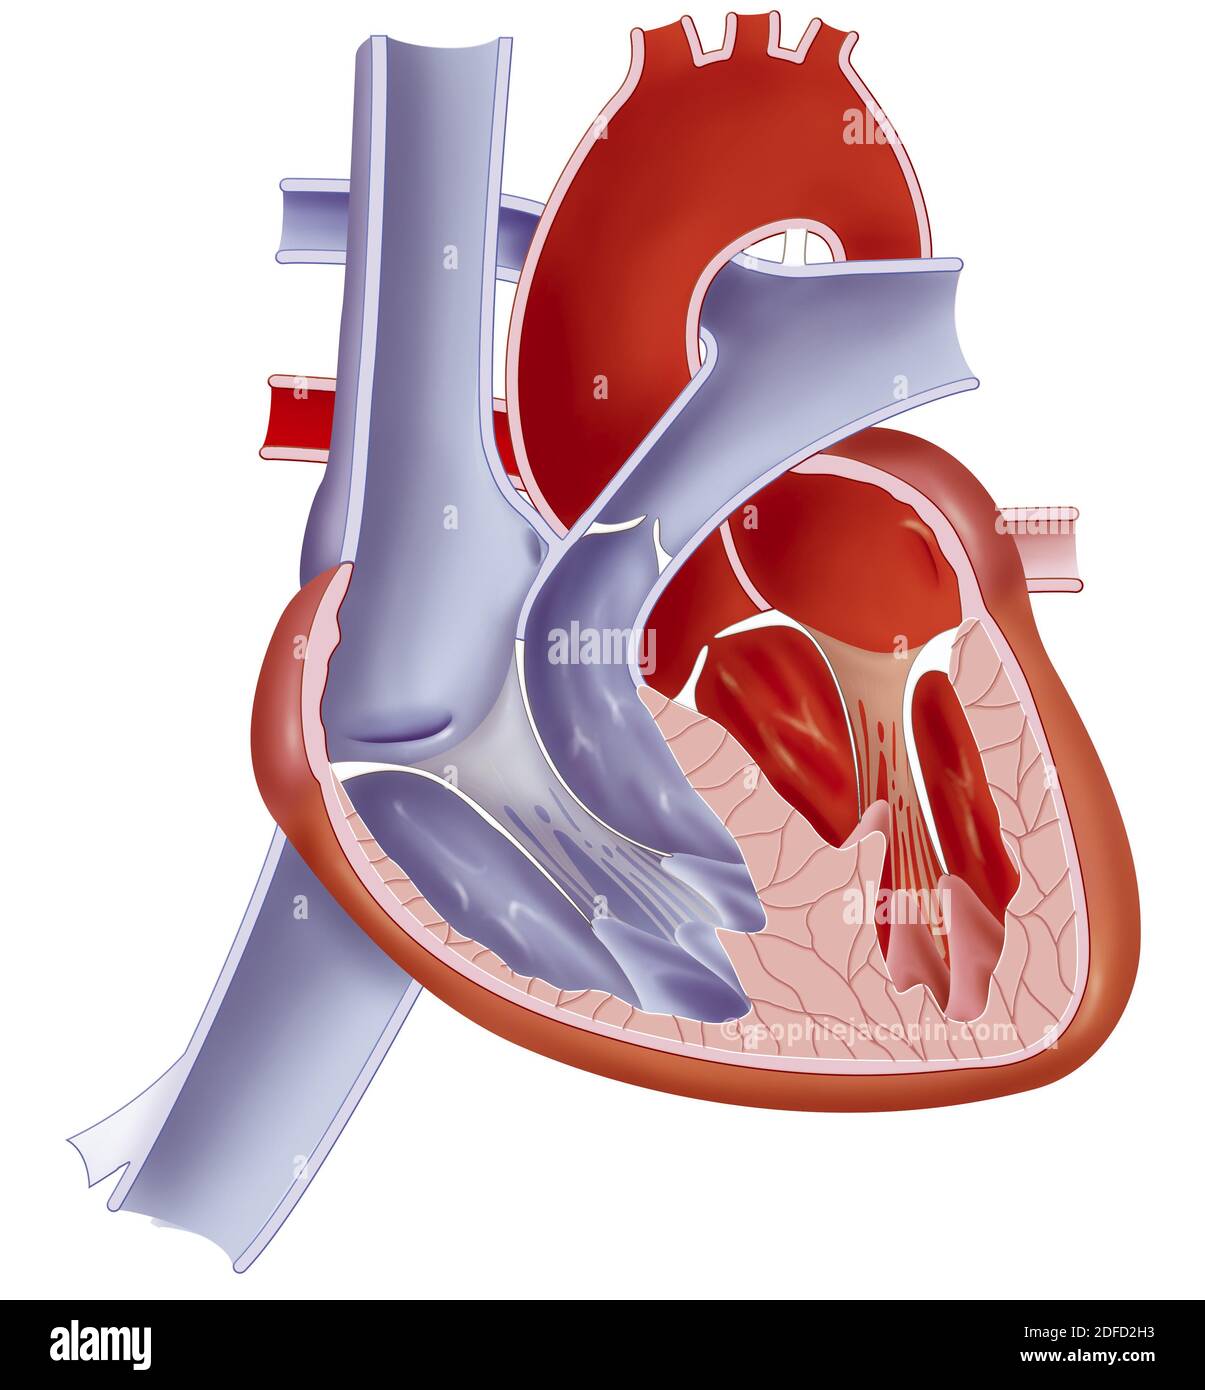 Anatomy of the heart of an infant. Stock Photo